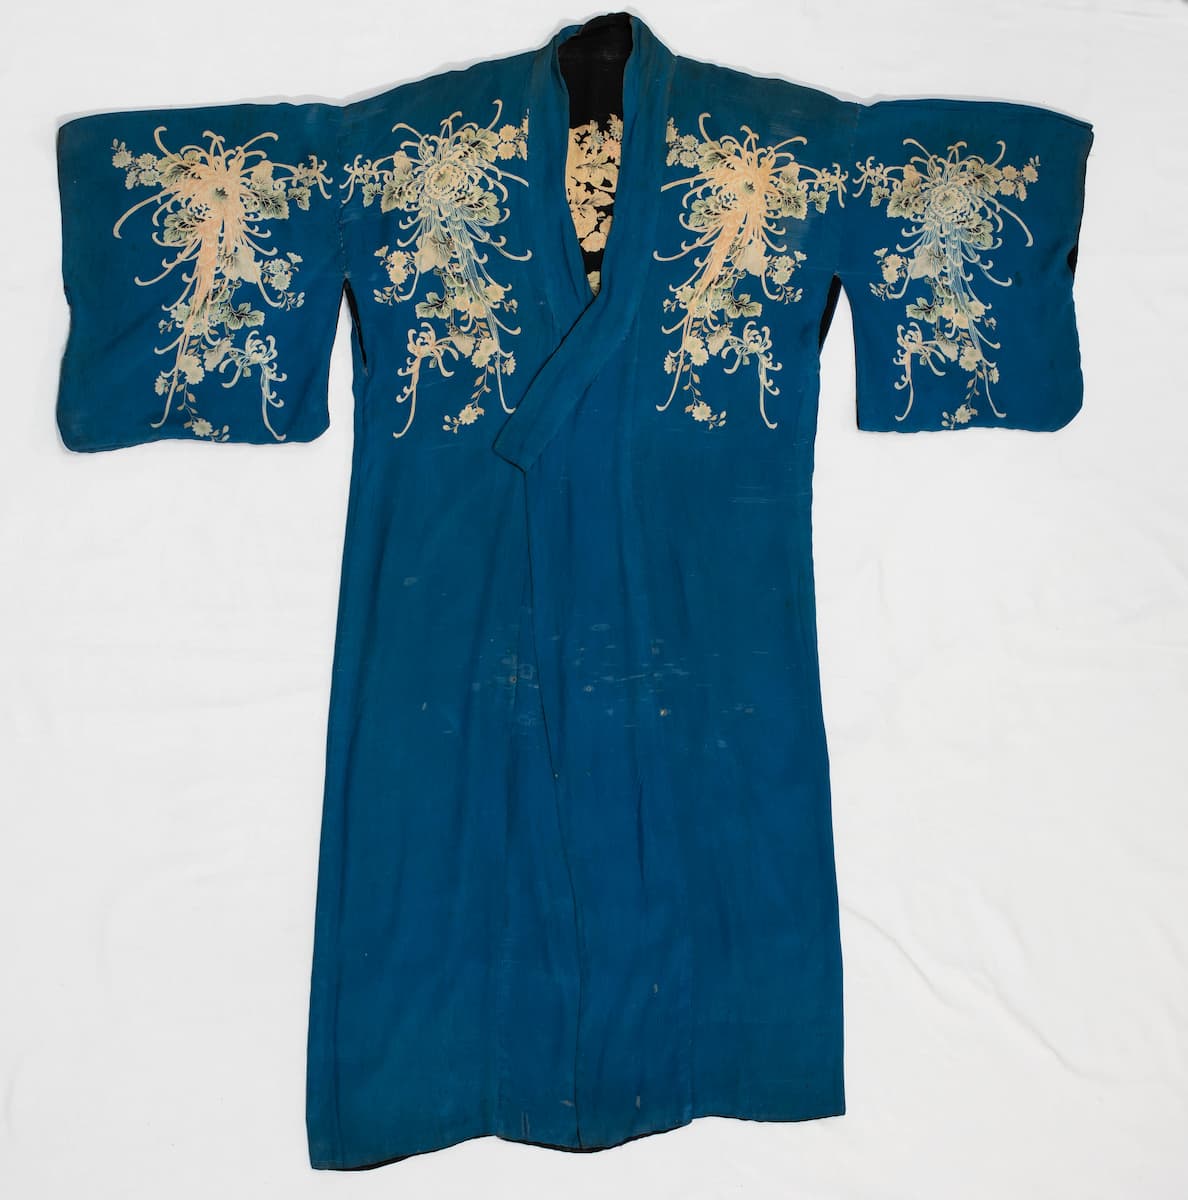 Kimono in blue and black silk printed with floral motifs; wide sleeves with underarm opening (Before). That, Japan. Photo: Victor Vasconcellos.